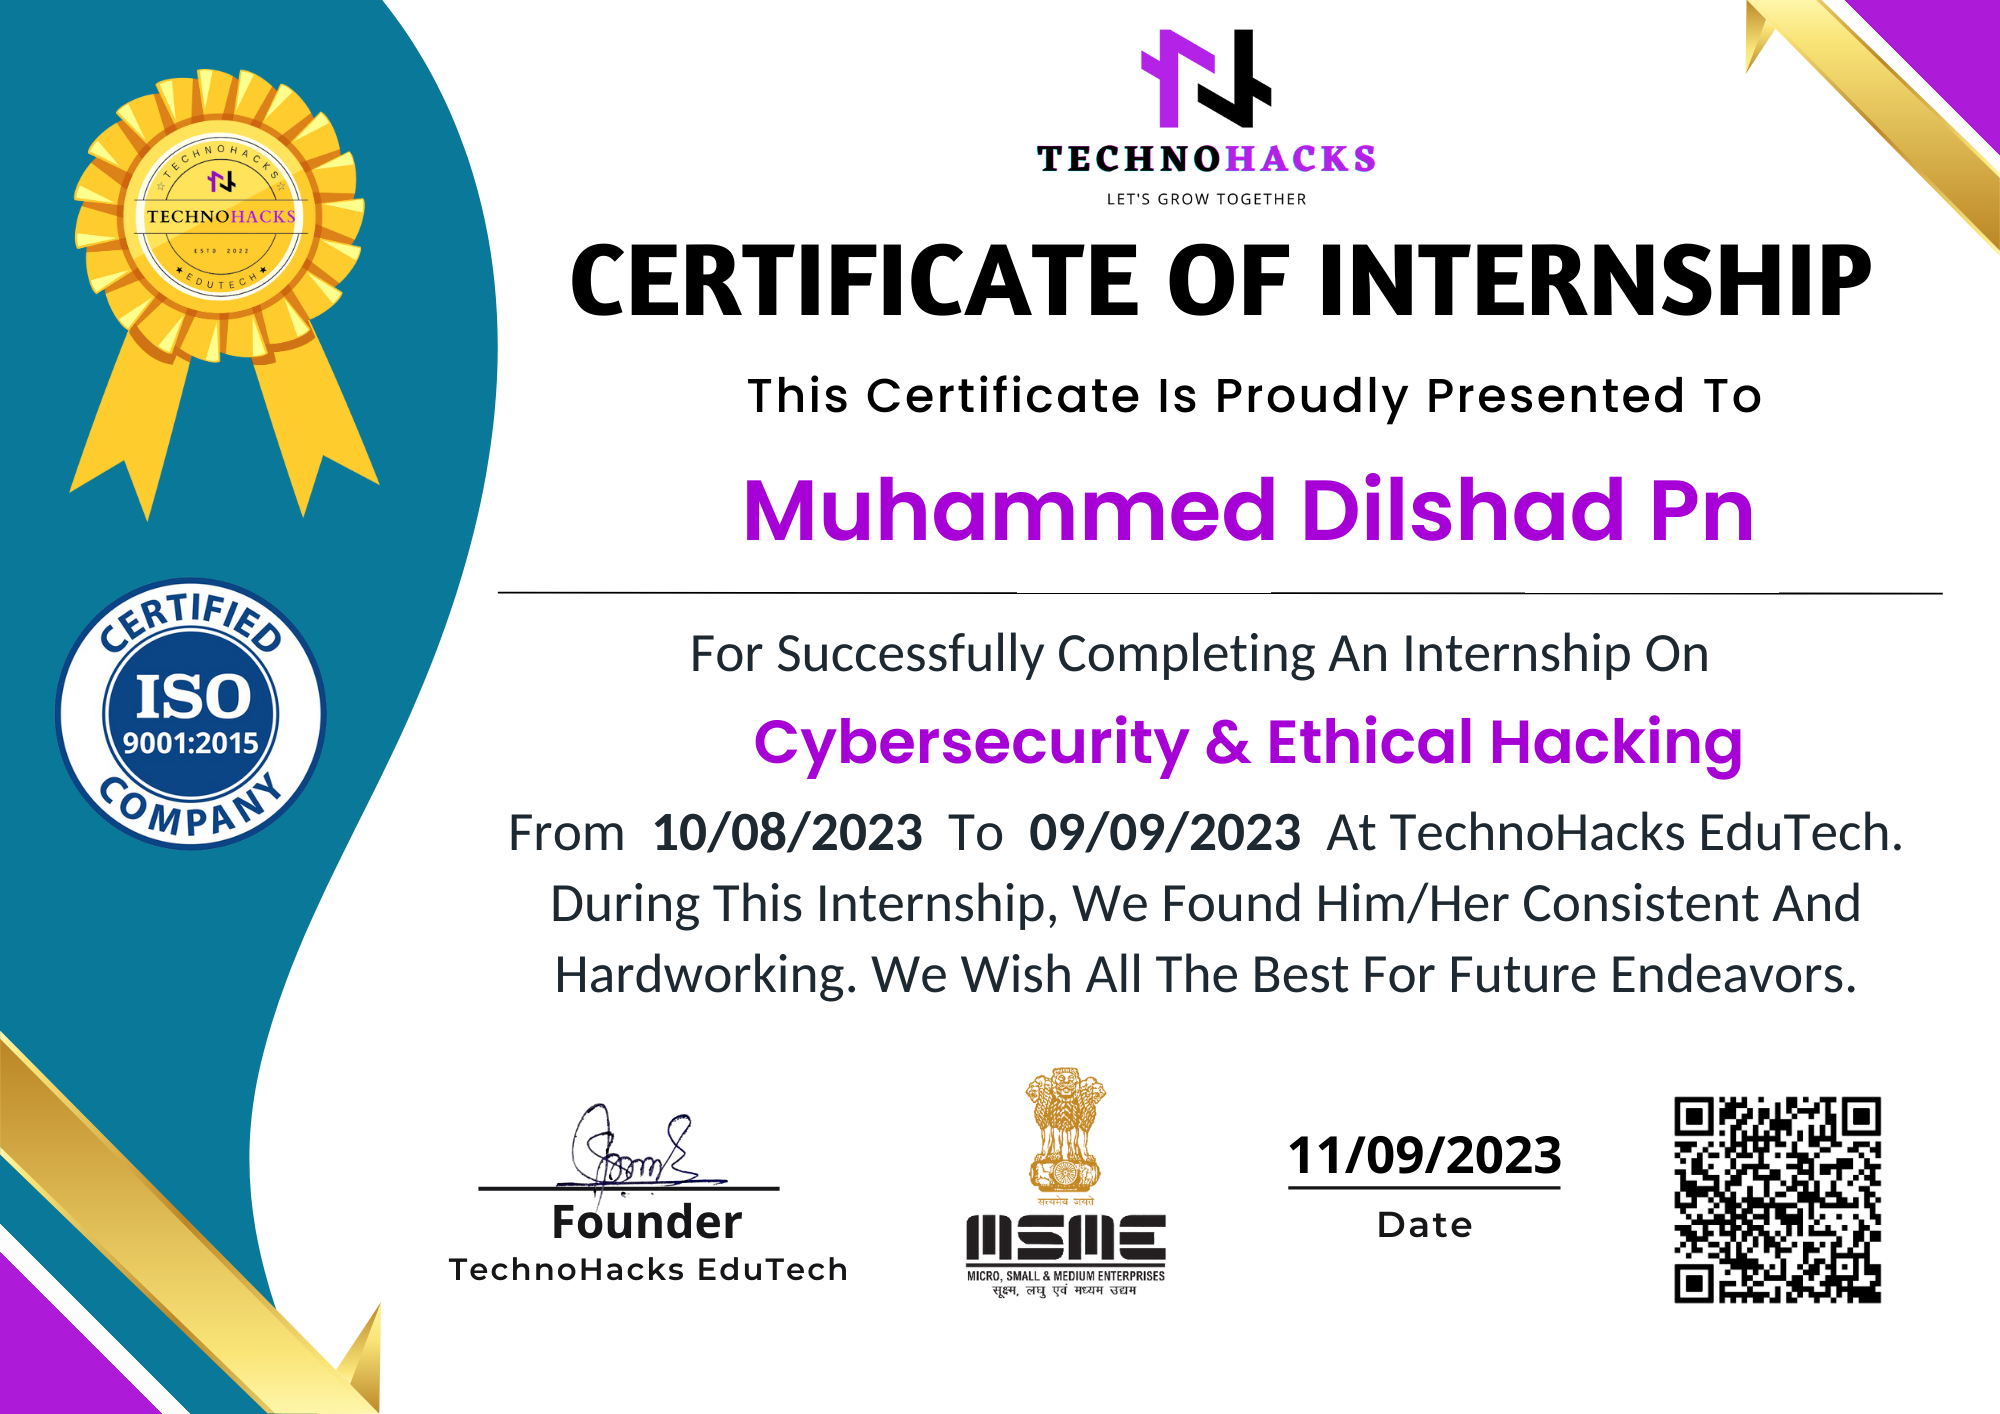 FQN
CN N

CERTIFICATE OF INTERNSHIP

This Certificate Is Proudly Presented To

Muhammed Dilshad Pn

-_ For Successfully Completing An Internship On
SED) Cybersecurity & Ethical Hacking

c Q
OMPAY, From 10/08/2023 To 09/09/2023 At TechnoHacks EduTech.
During This Internship, We Found Him/Her Consistent And
Hardworking. We Wish All The Best For Future Endeavors.

 

 

<RVIF/,

 

di 11/09/2023

Date

 

Founder
TechnoHacks EduTech

 

am am
-— -
-_— —
WICRO_ SMALL & MUDRW ENTERPRISES
qe wy Tw gw